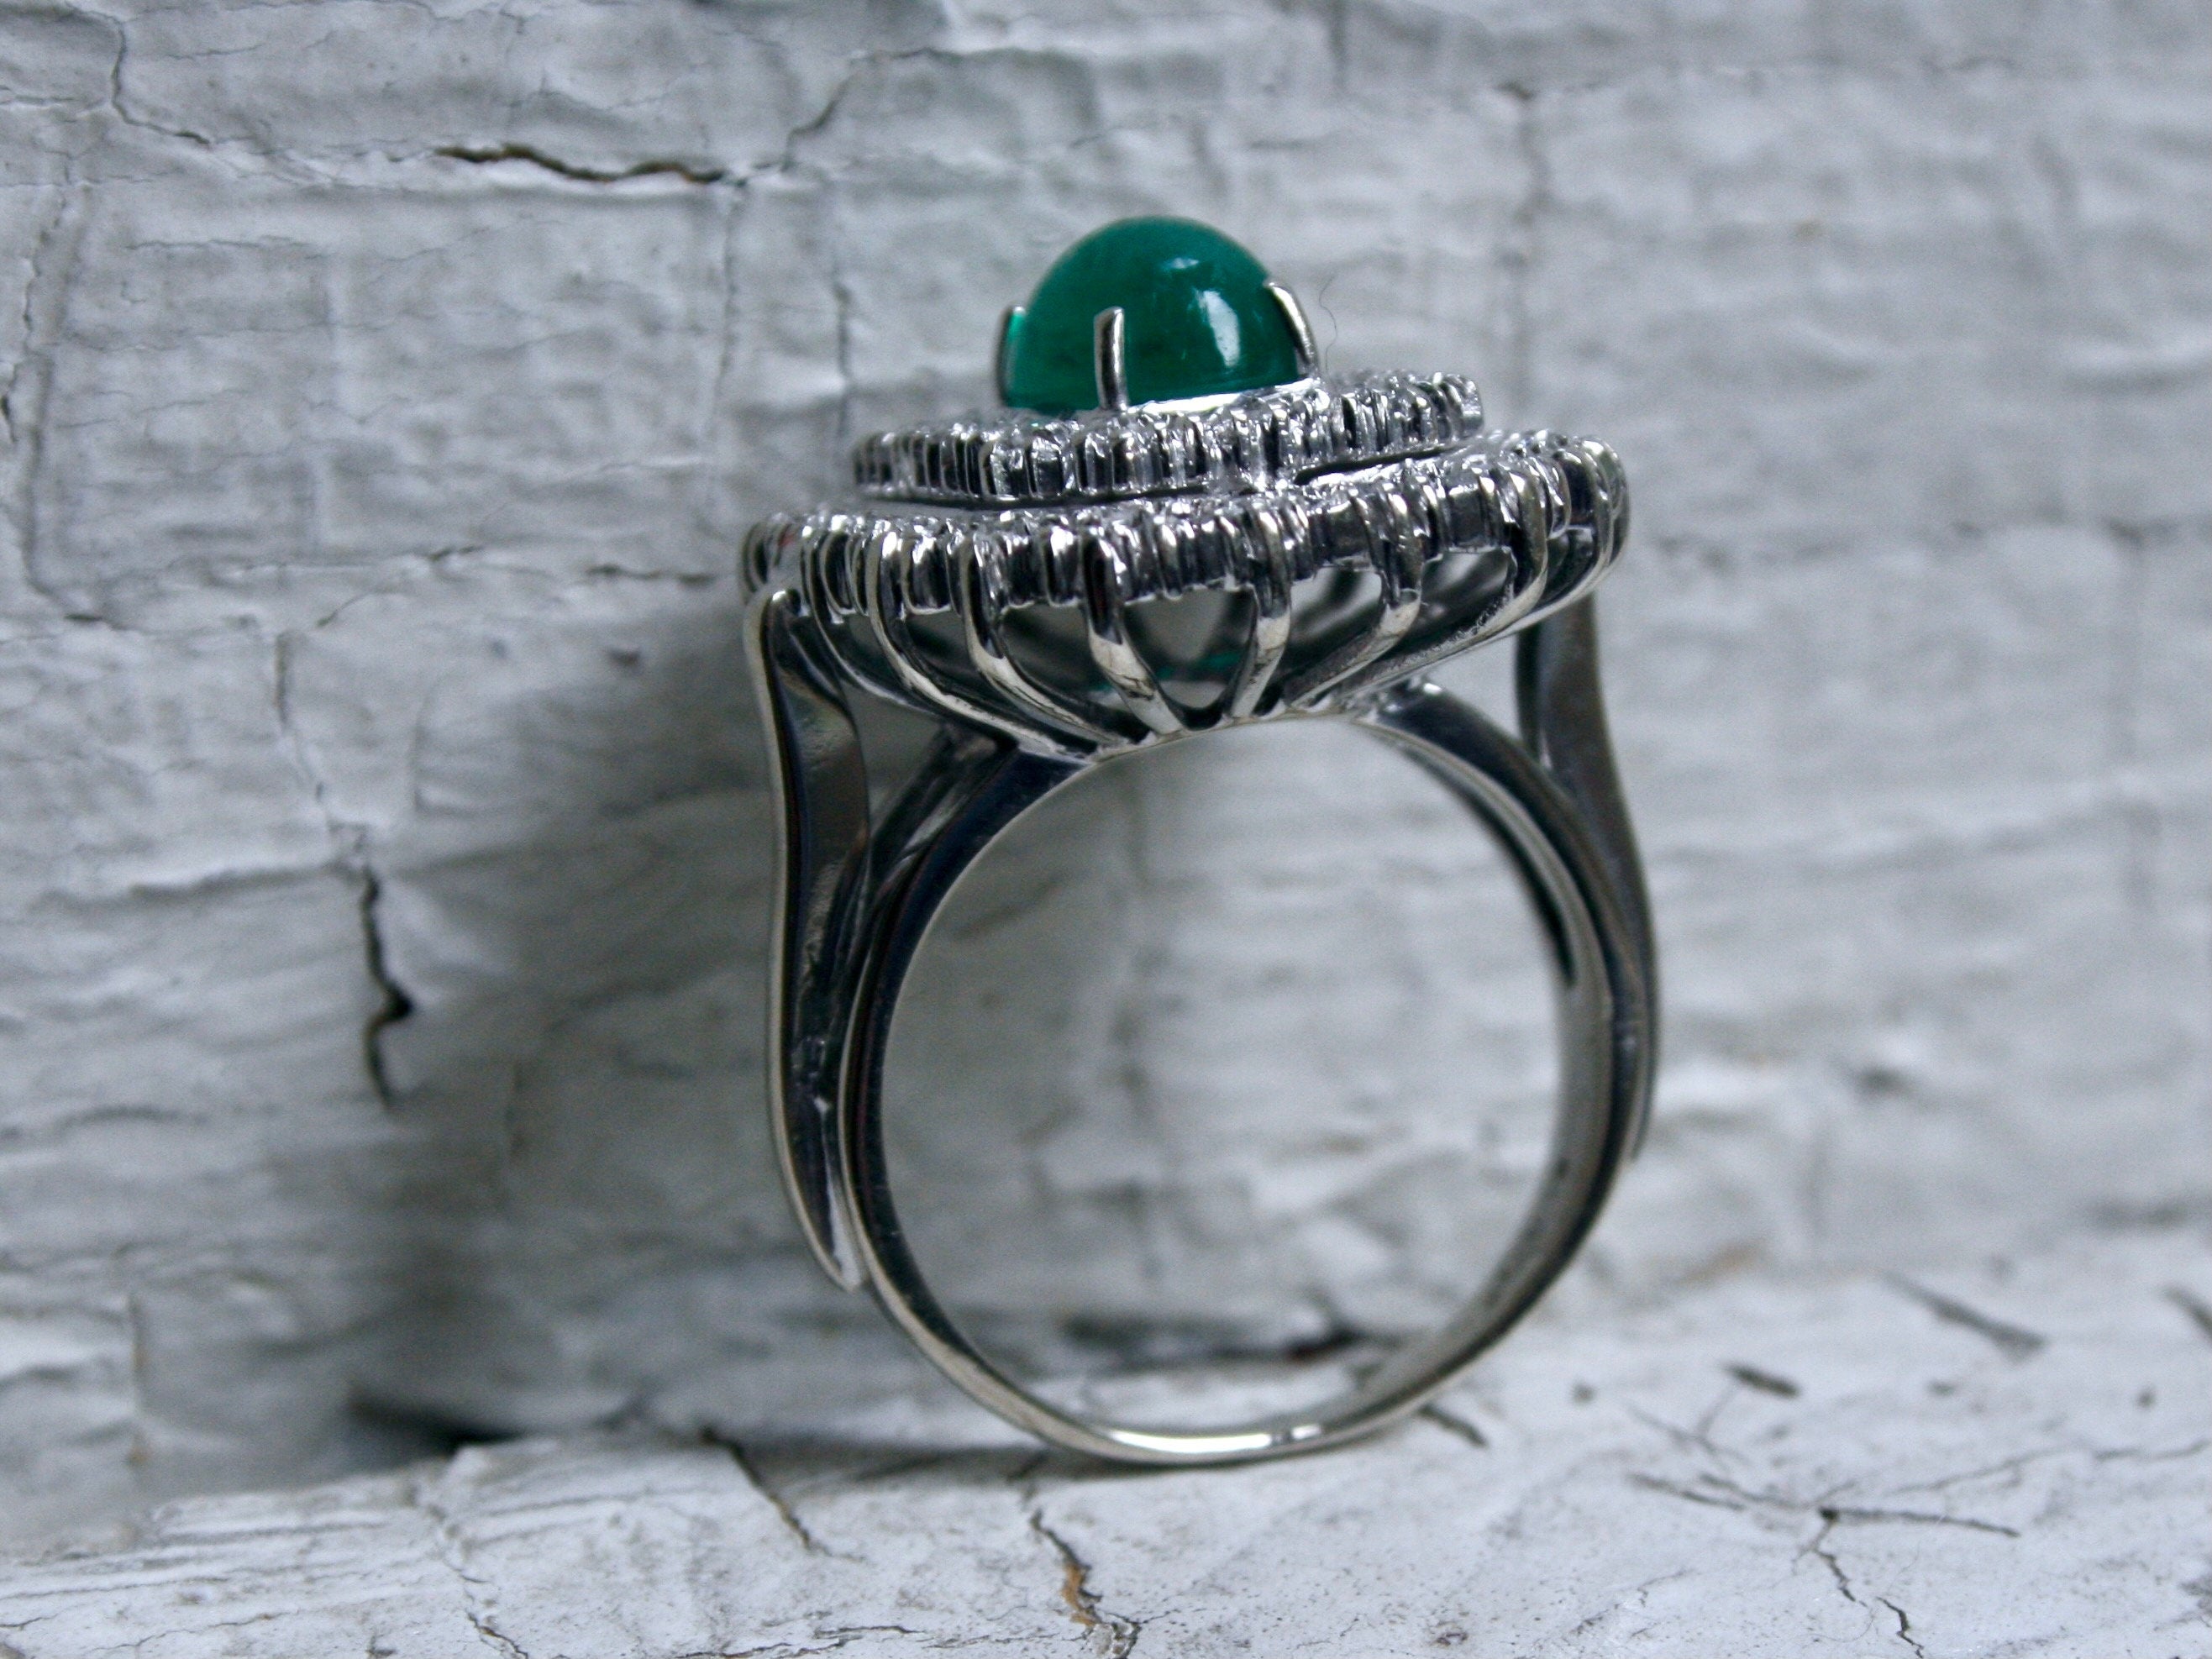 Gorgeous Vintage 18K White Gold Cabochon Emerald and Diamond Double Halo Ring Engagement Ring - 2.18ct.